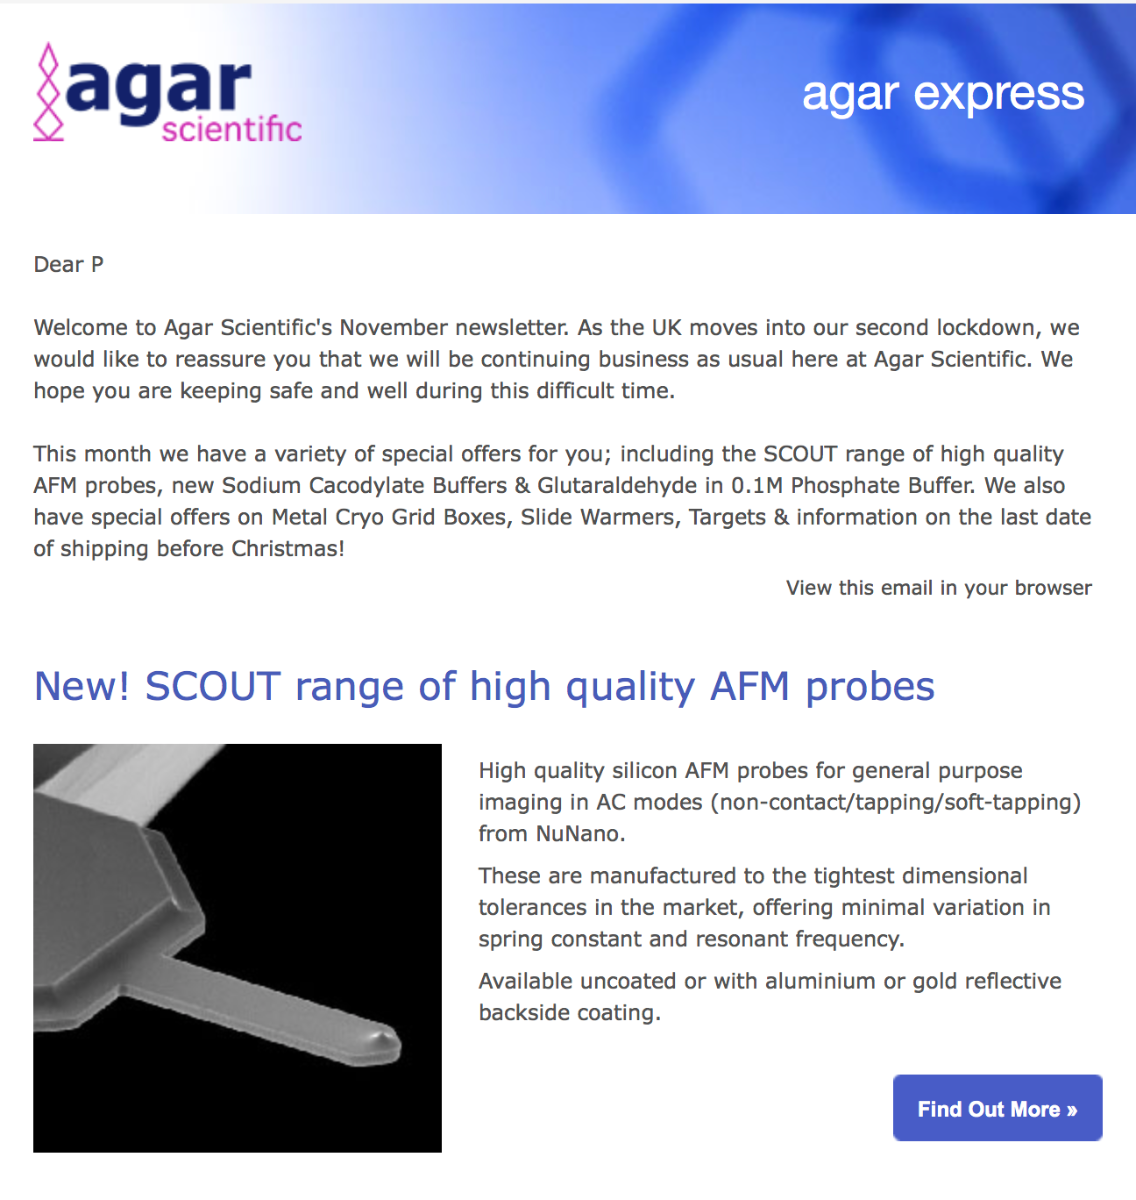 Agar Express November 2020 -  extra discounts this month, new AFM probes and more!